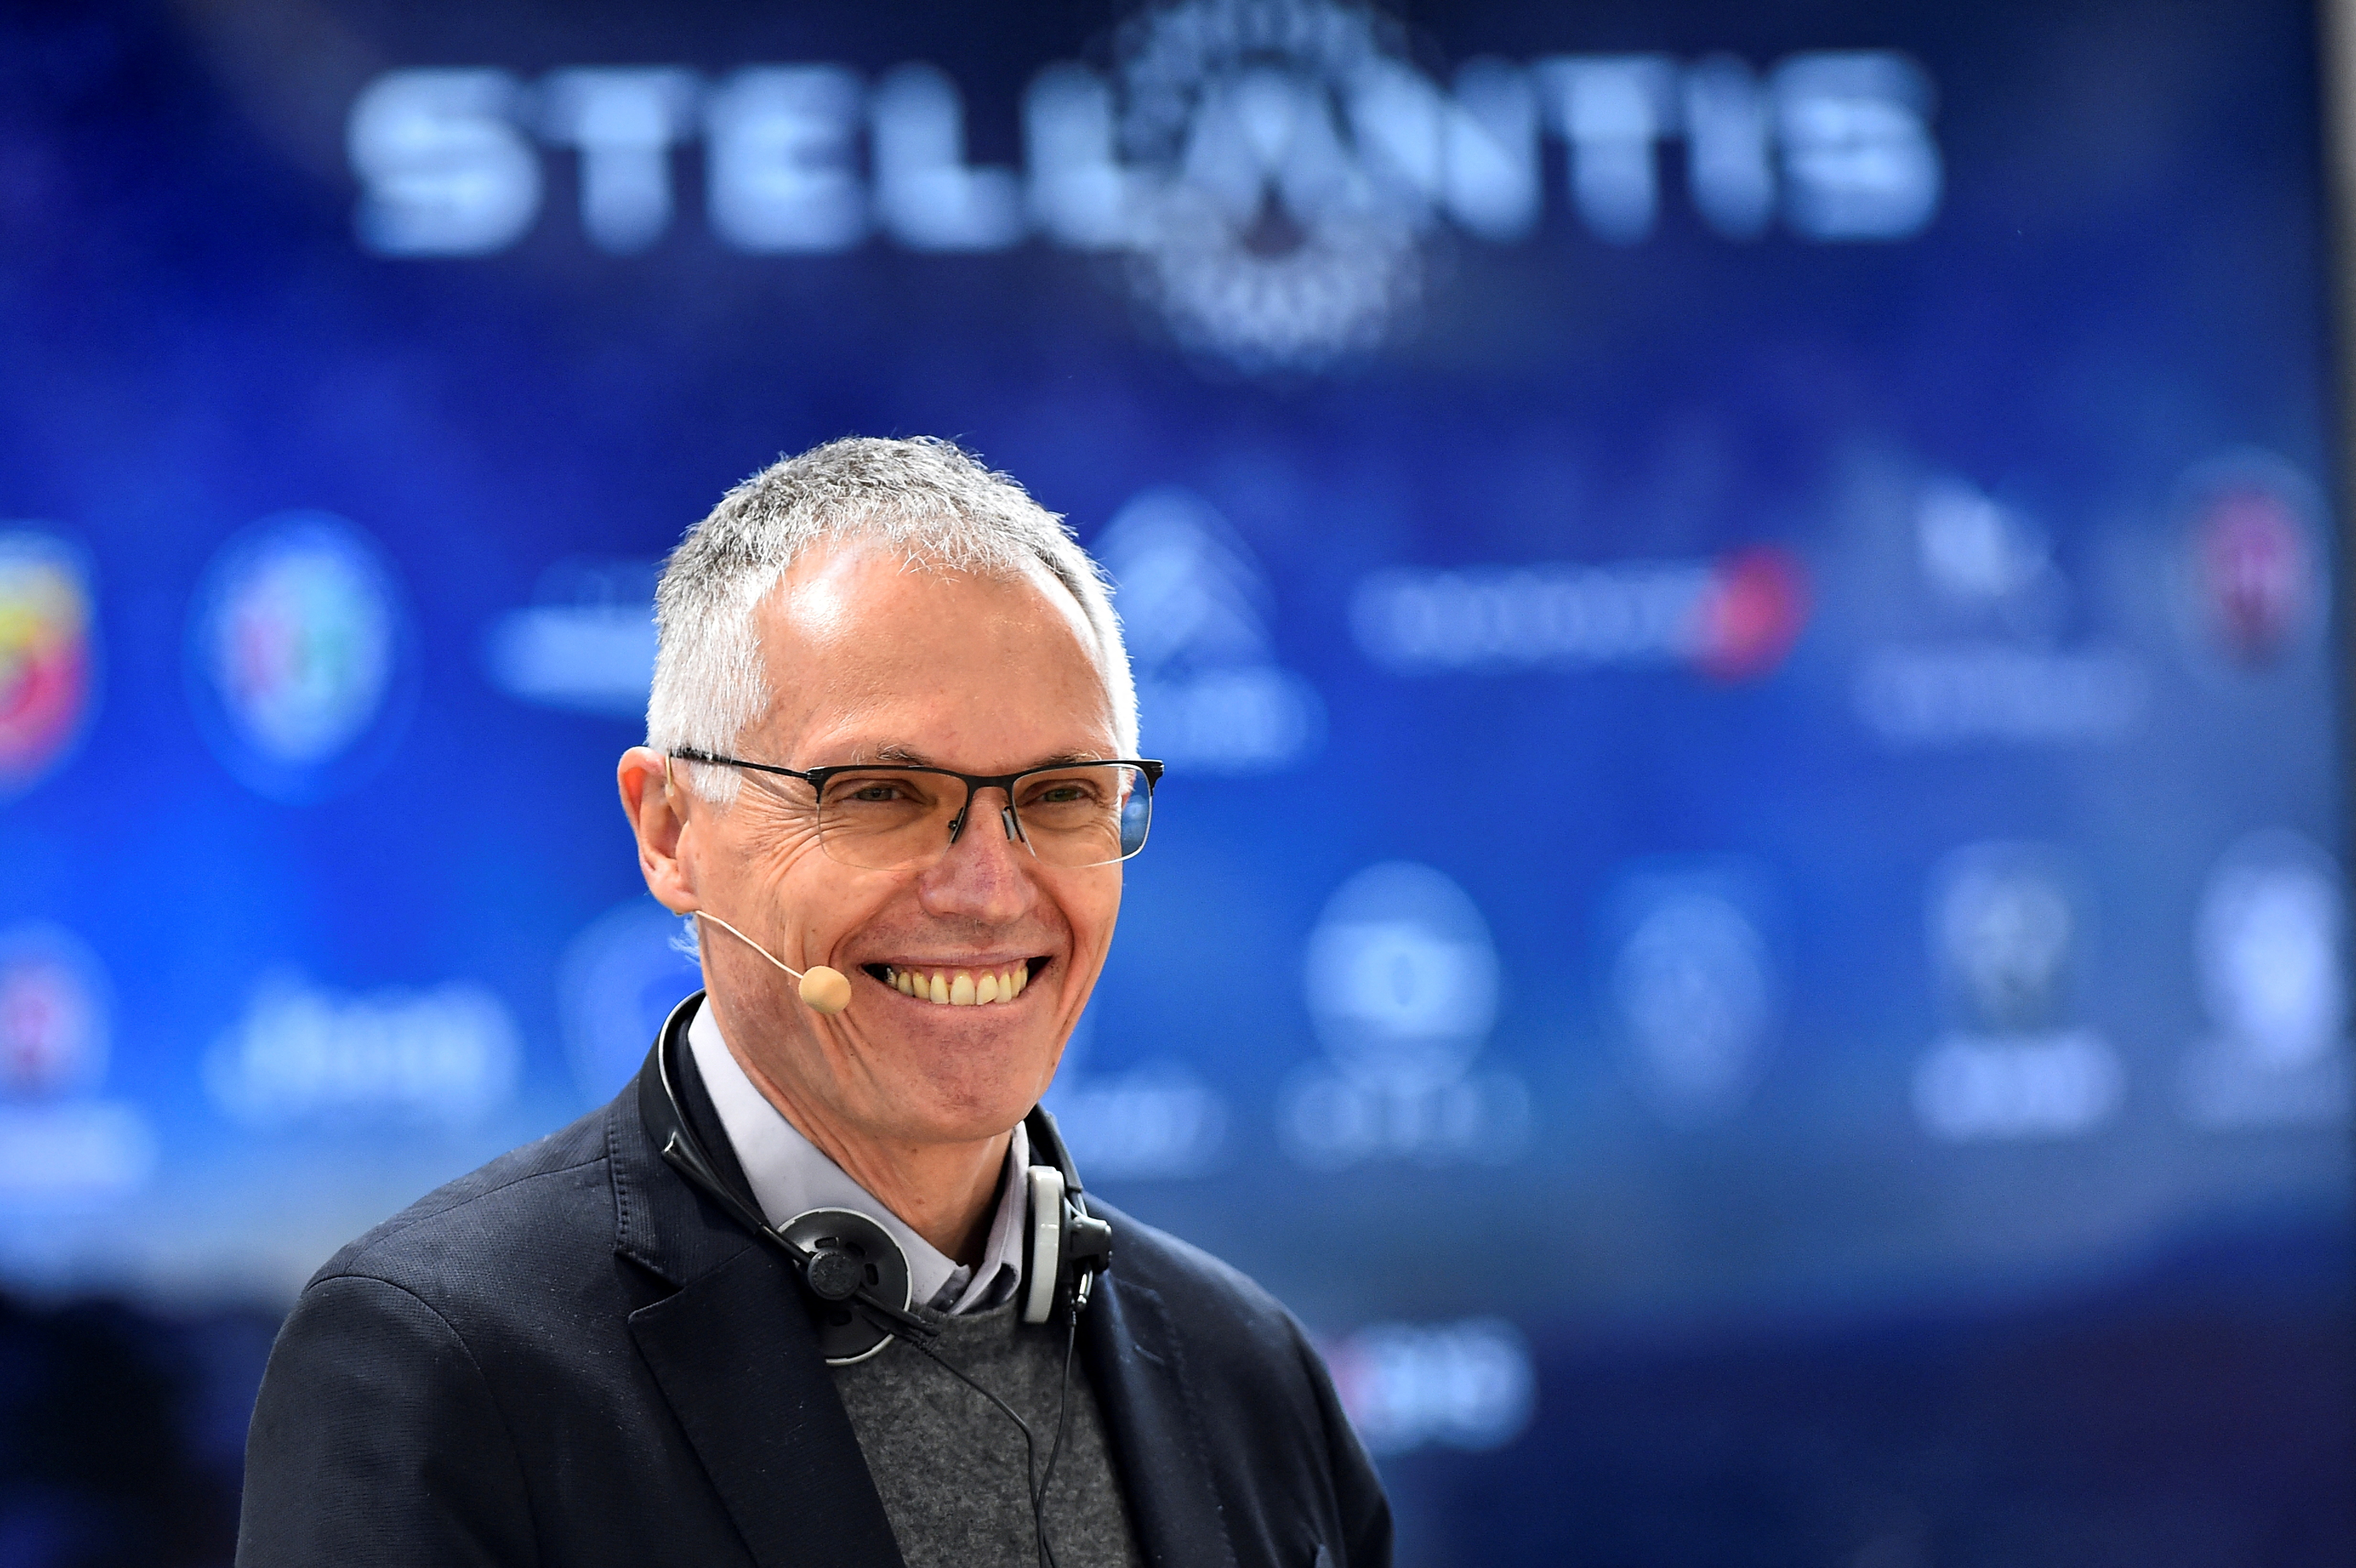 Stellantis CEO Carlos Tavares meets unions and holds a news conference in Turin